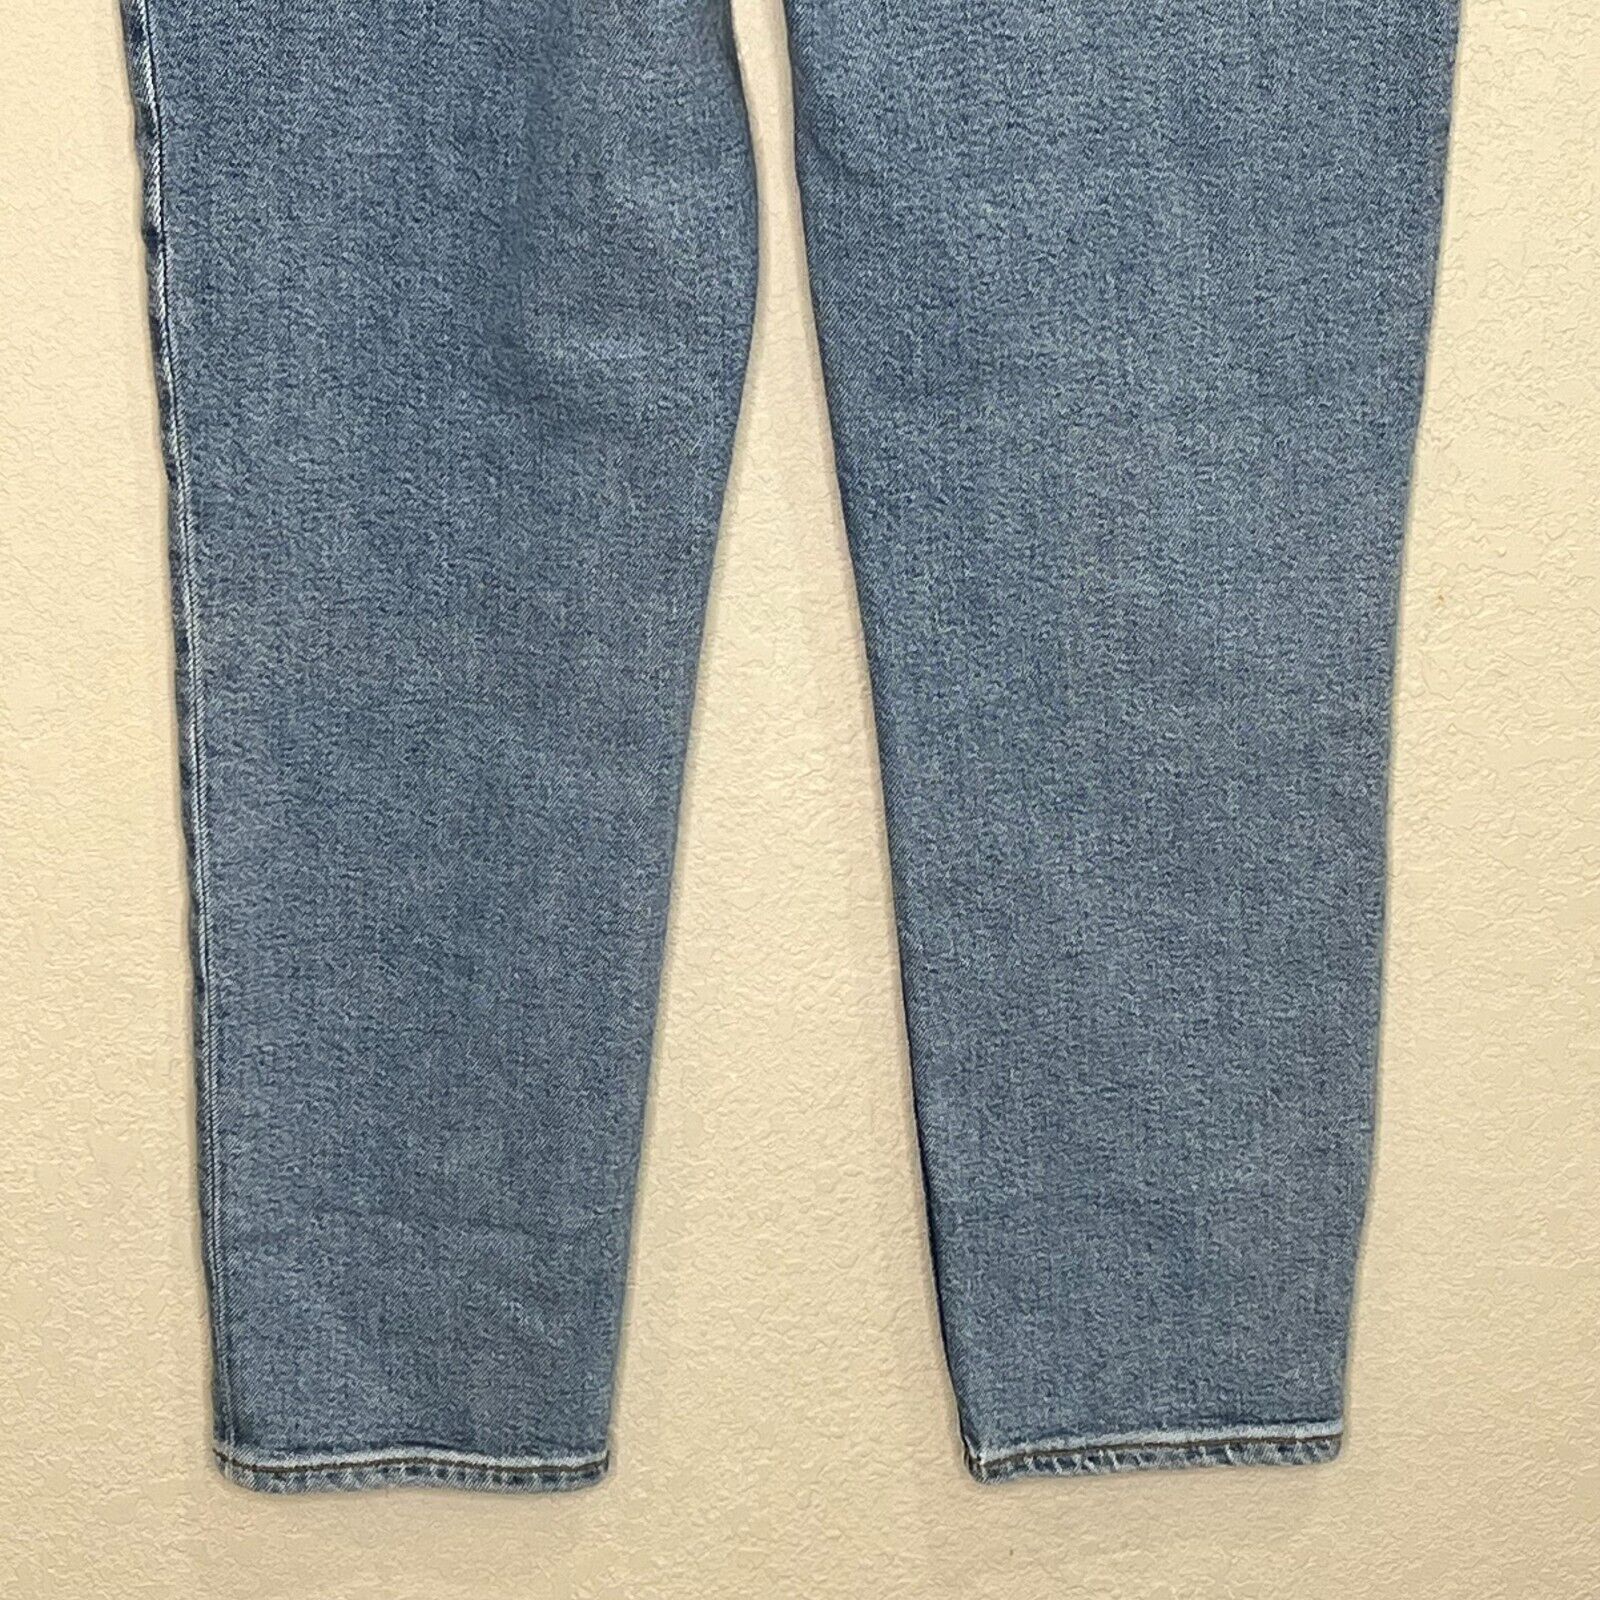 RE/DONE 90s High Rise Ankle Cropped Blue Jeans Sz 30 NEW $265